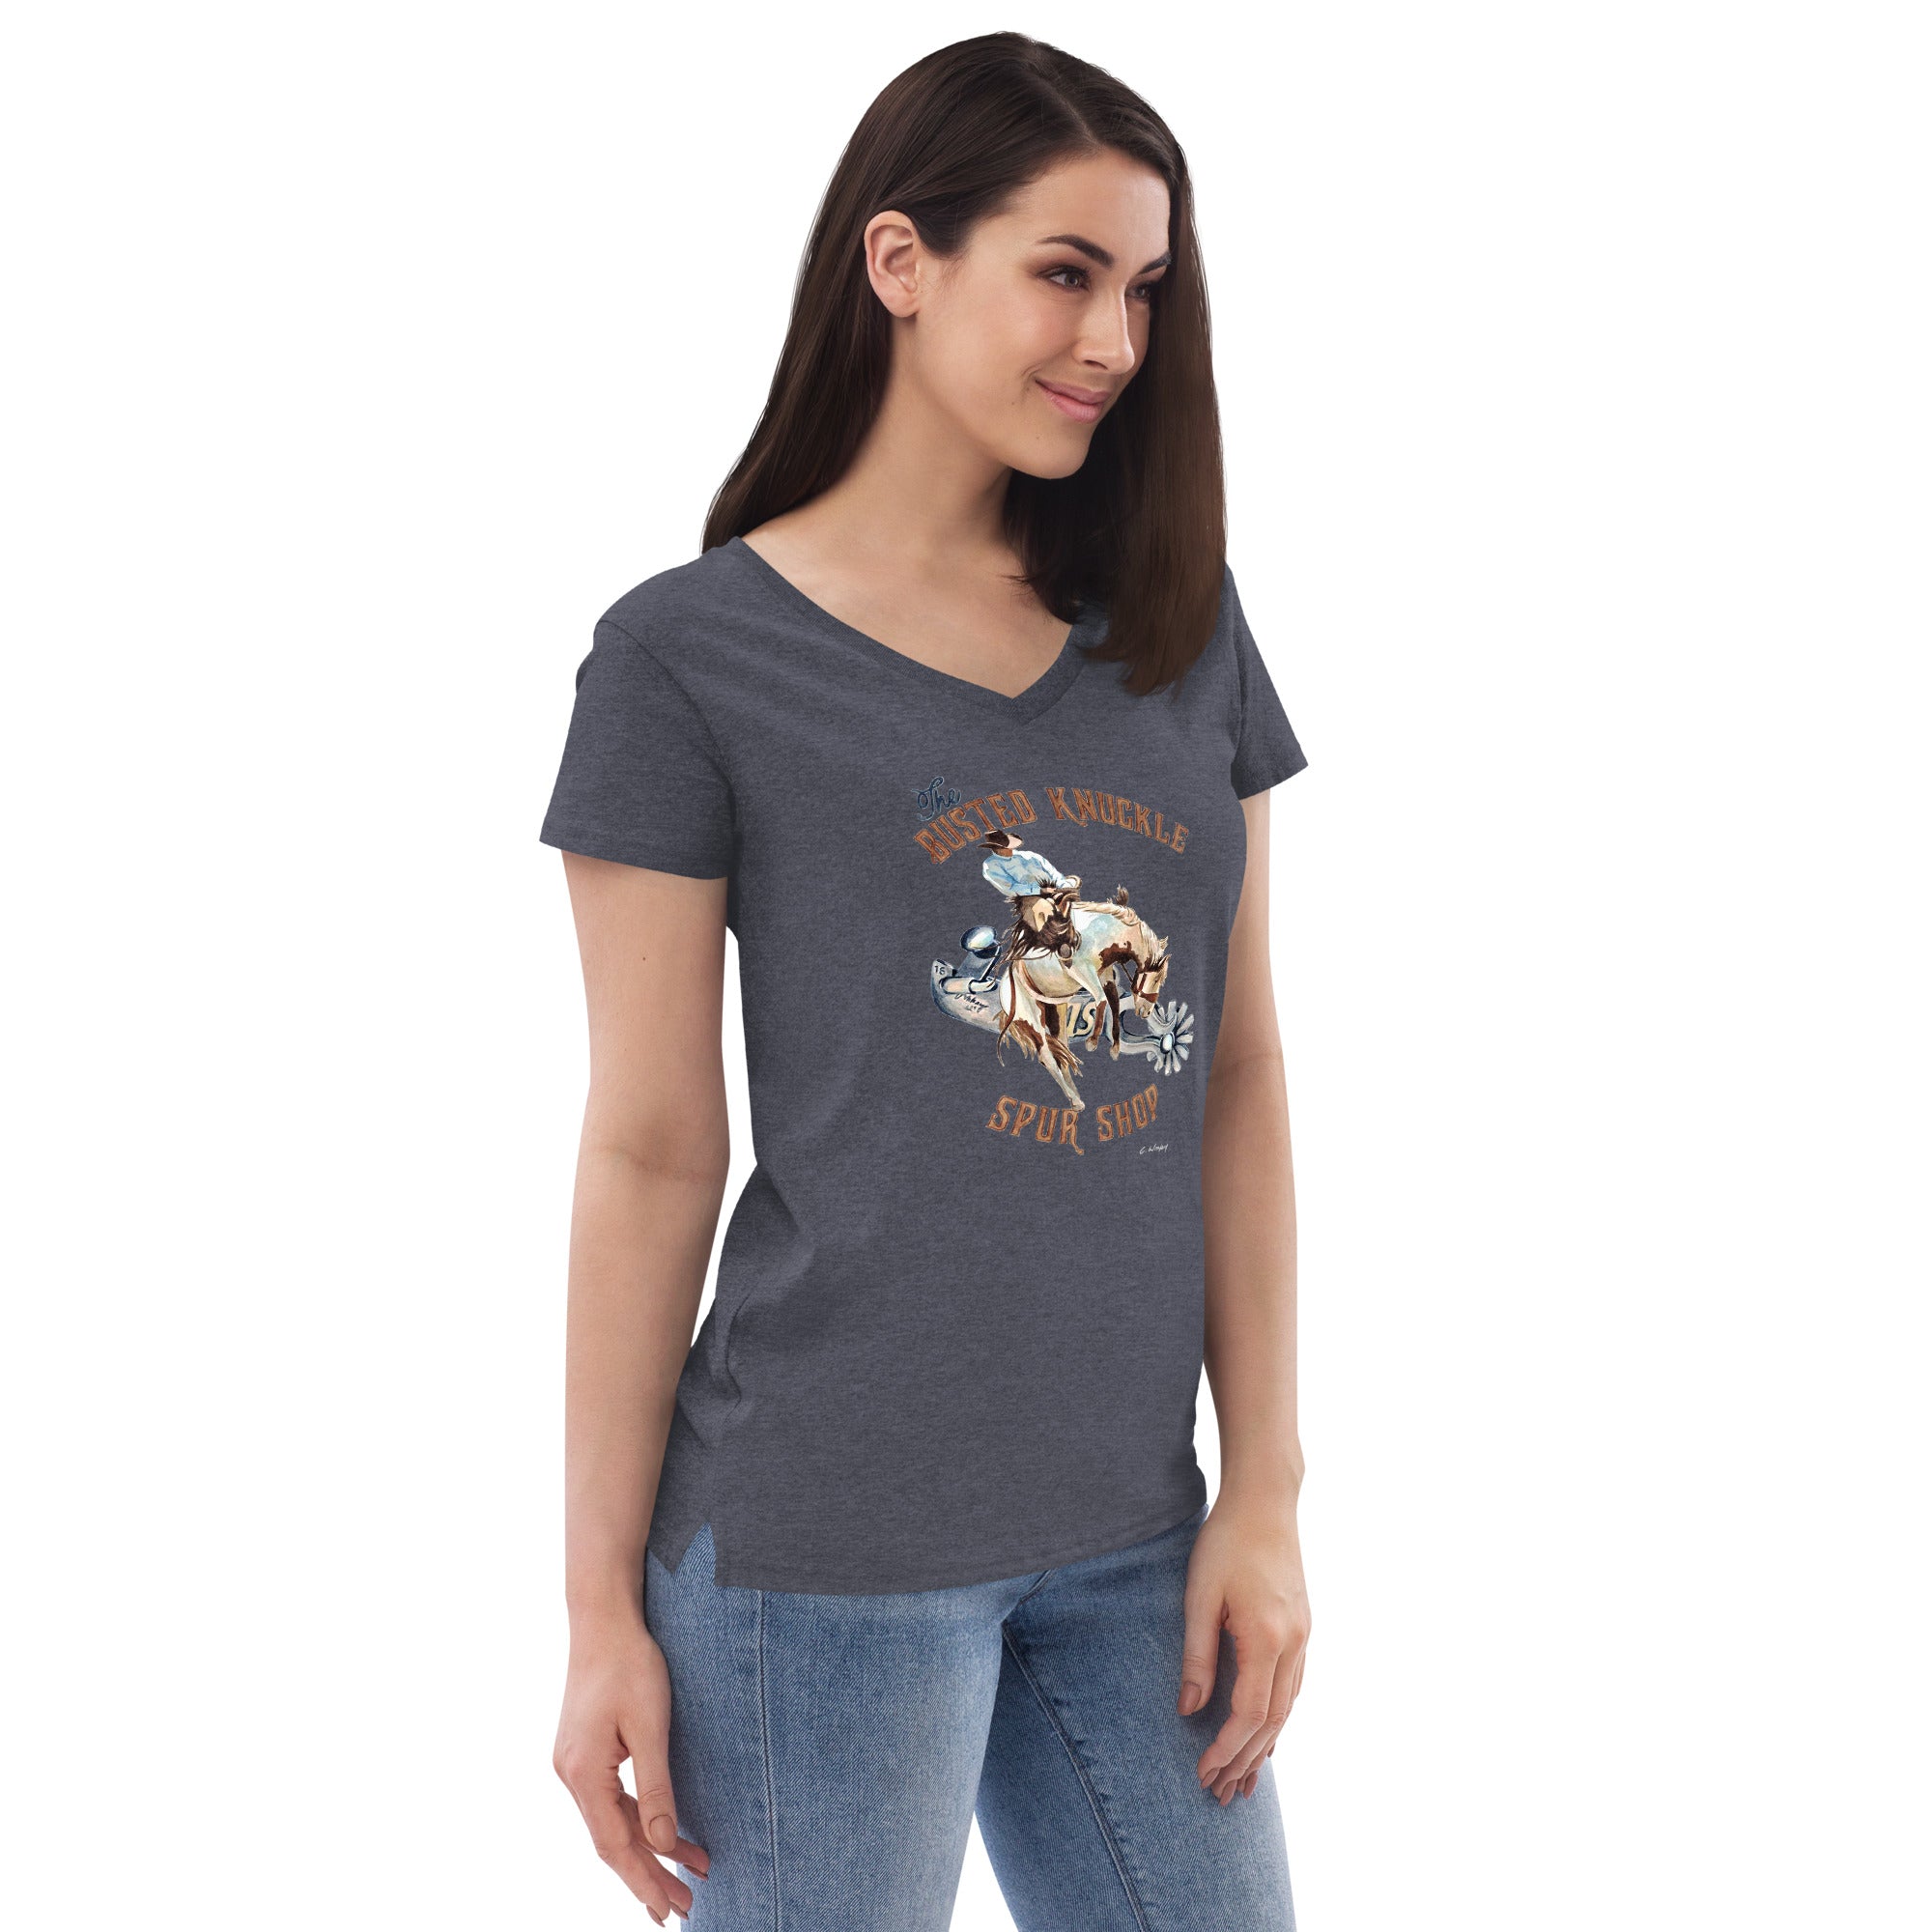 The BKSS Women's Recycled V-neck T-shirt – The Busted Knuckle